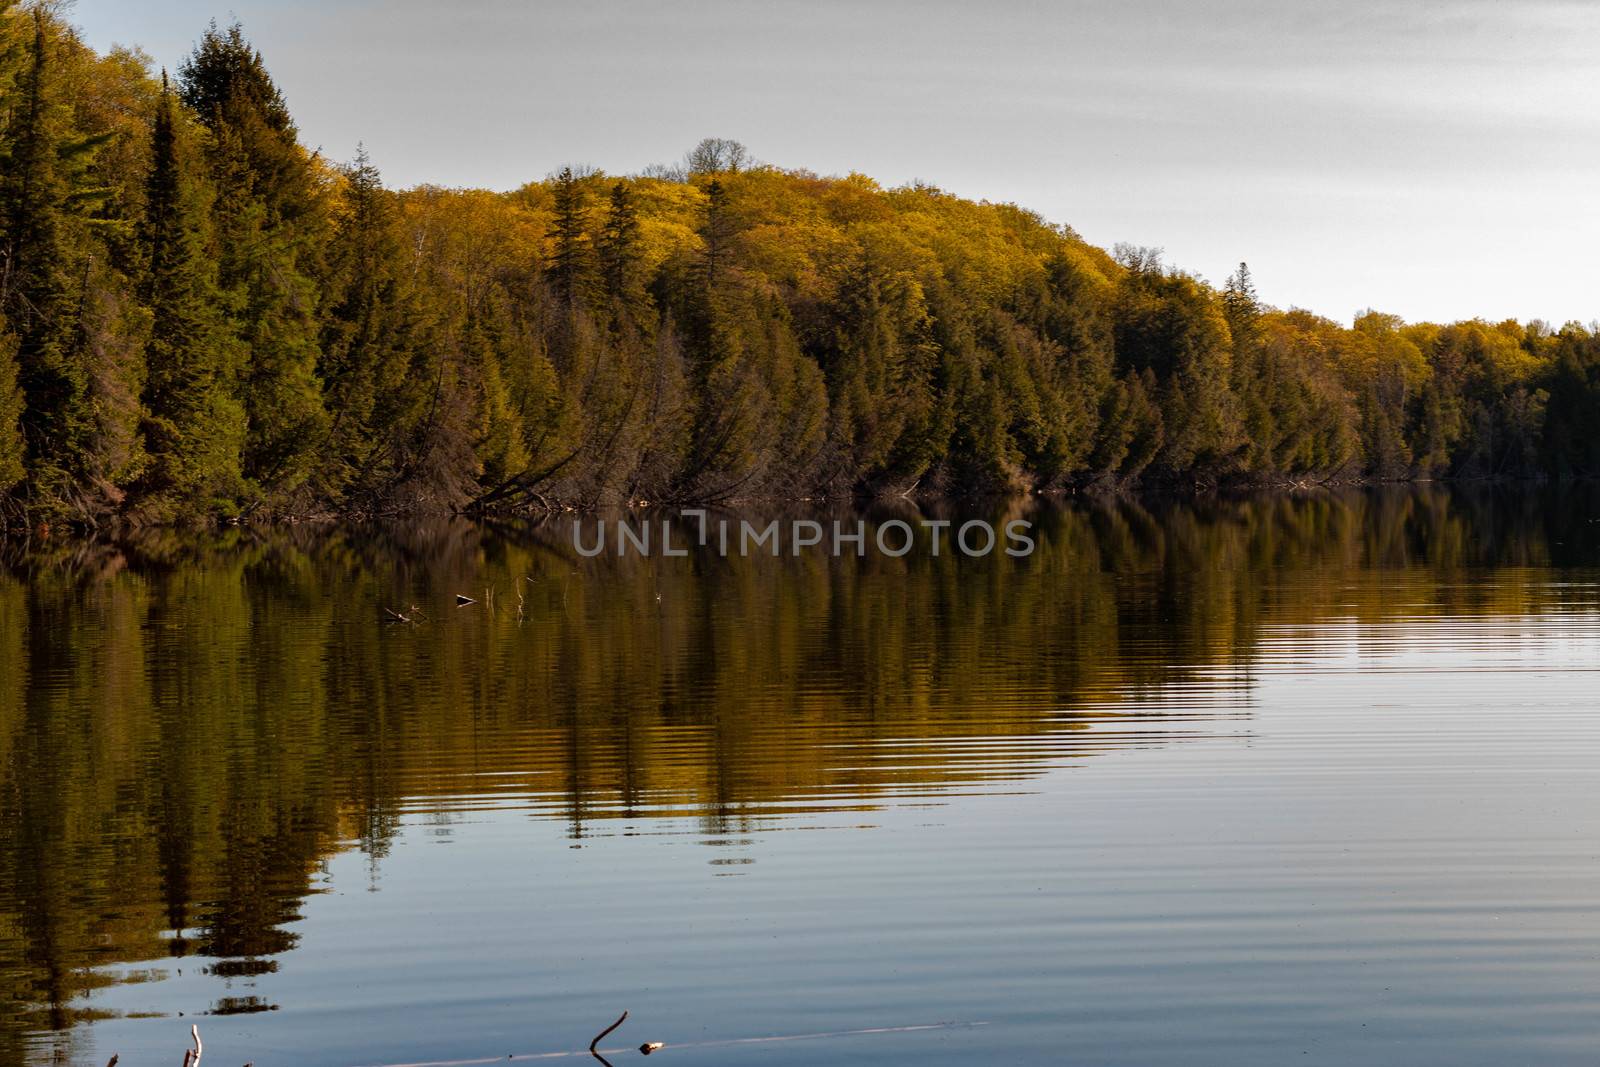 Spring photographs of Gilmour Ontario lake scence. This is in Limerick county, a popular tourist destination in Northern Ontario by mynewturtle1